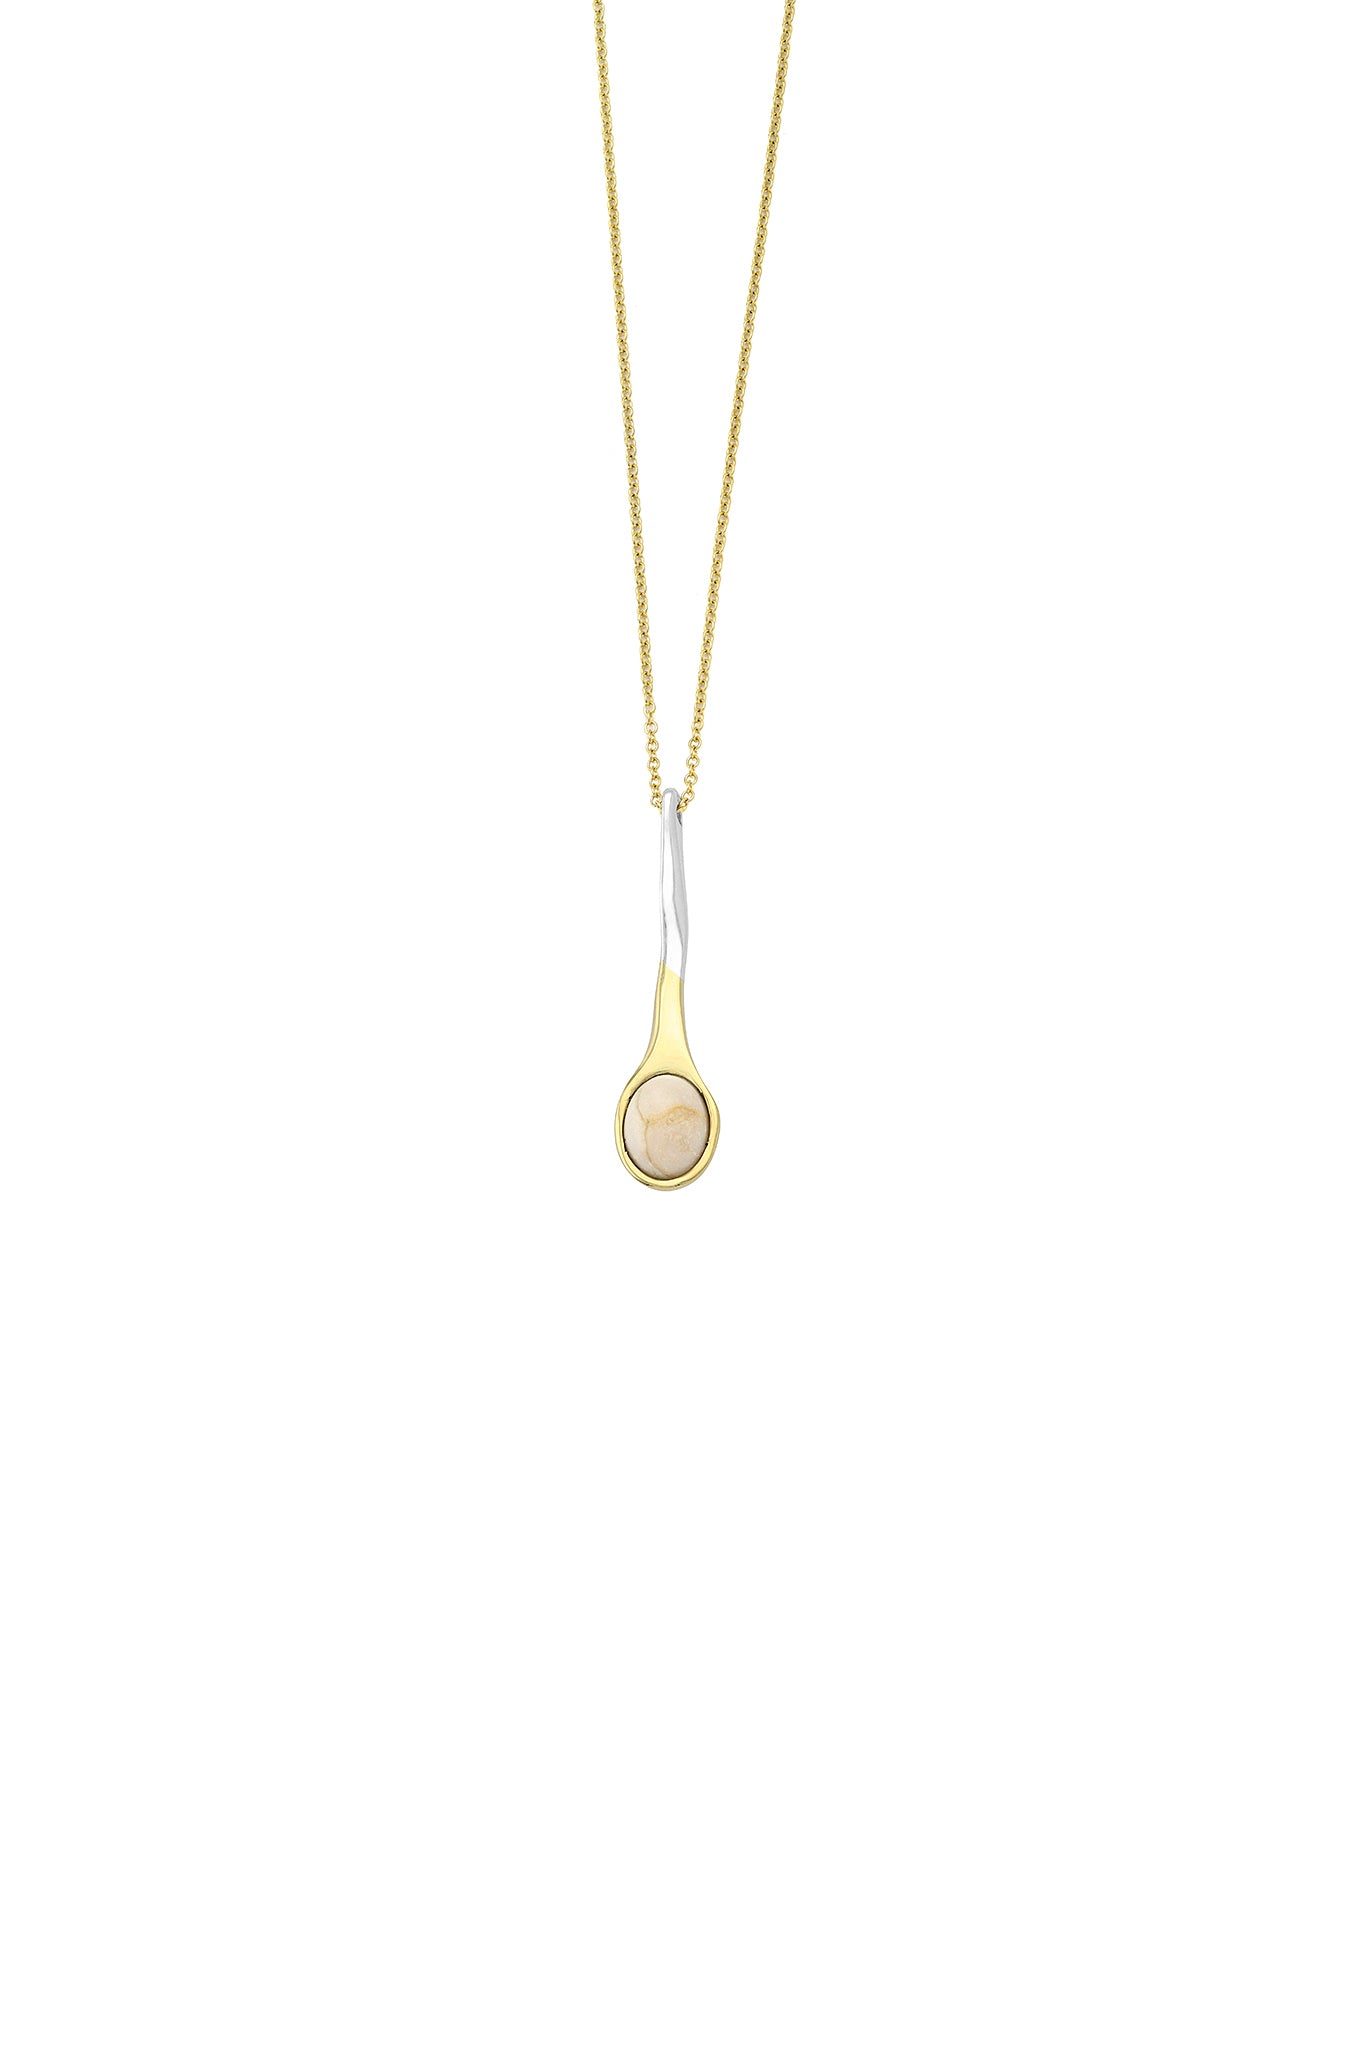 Short Sporos Stone Necklace 18k/925 with 18k chain